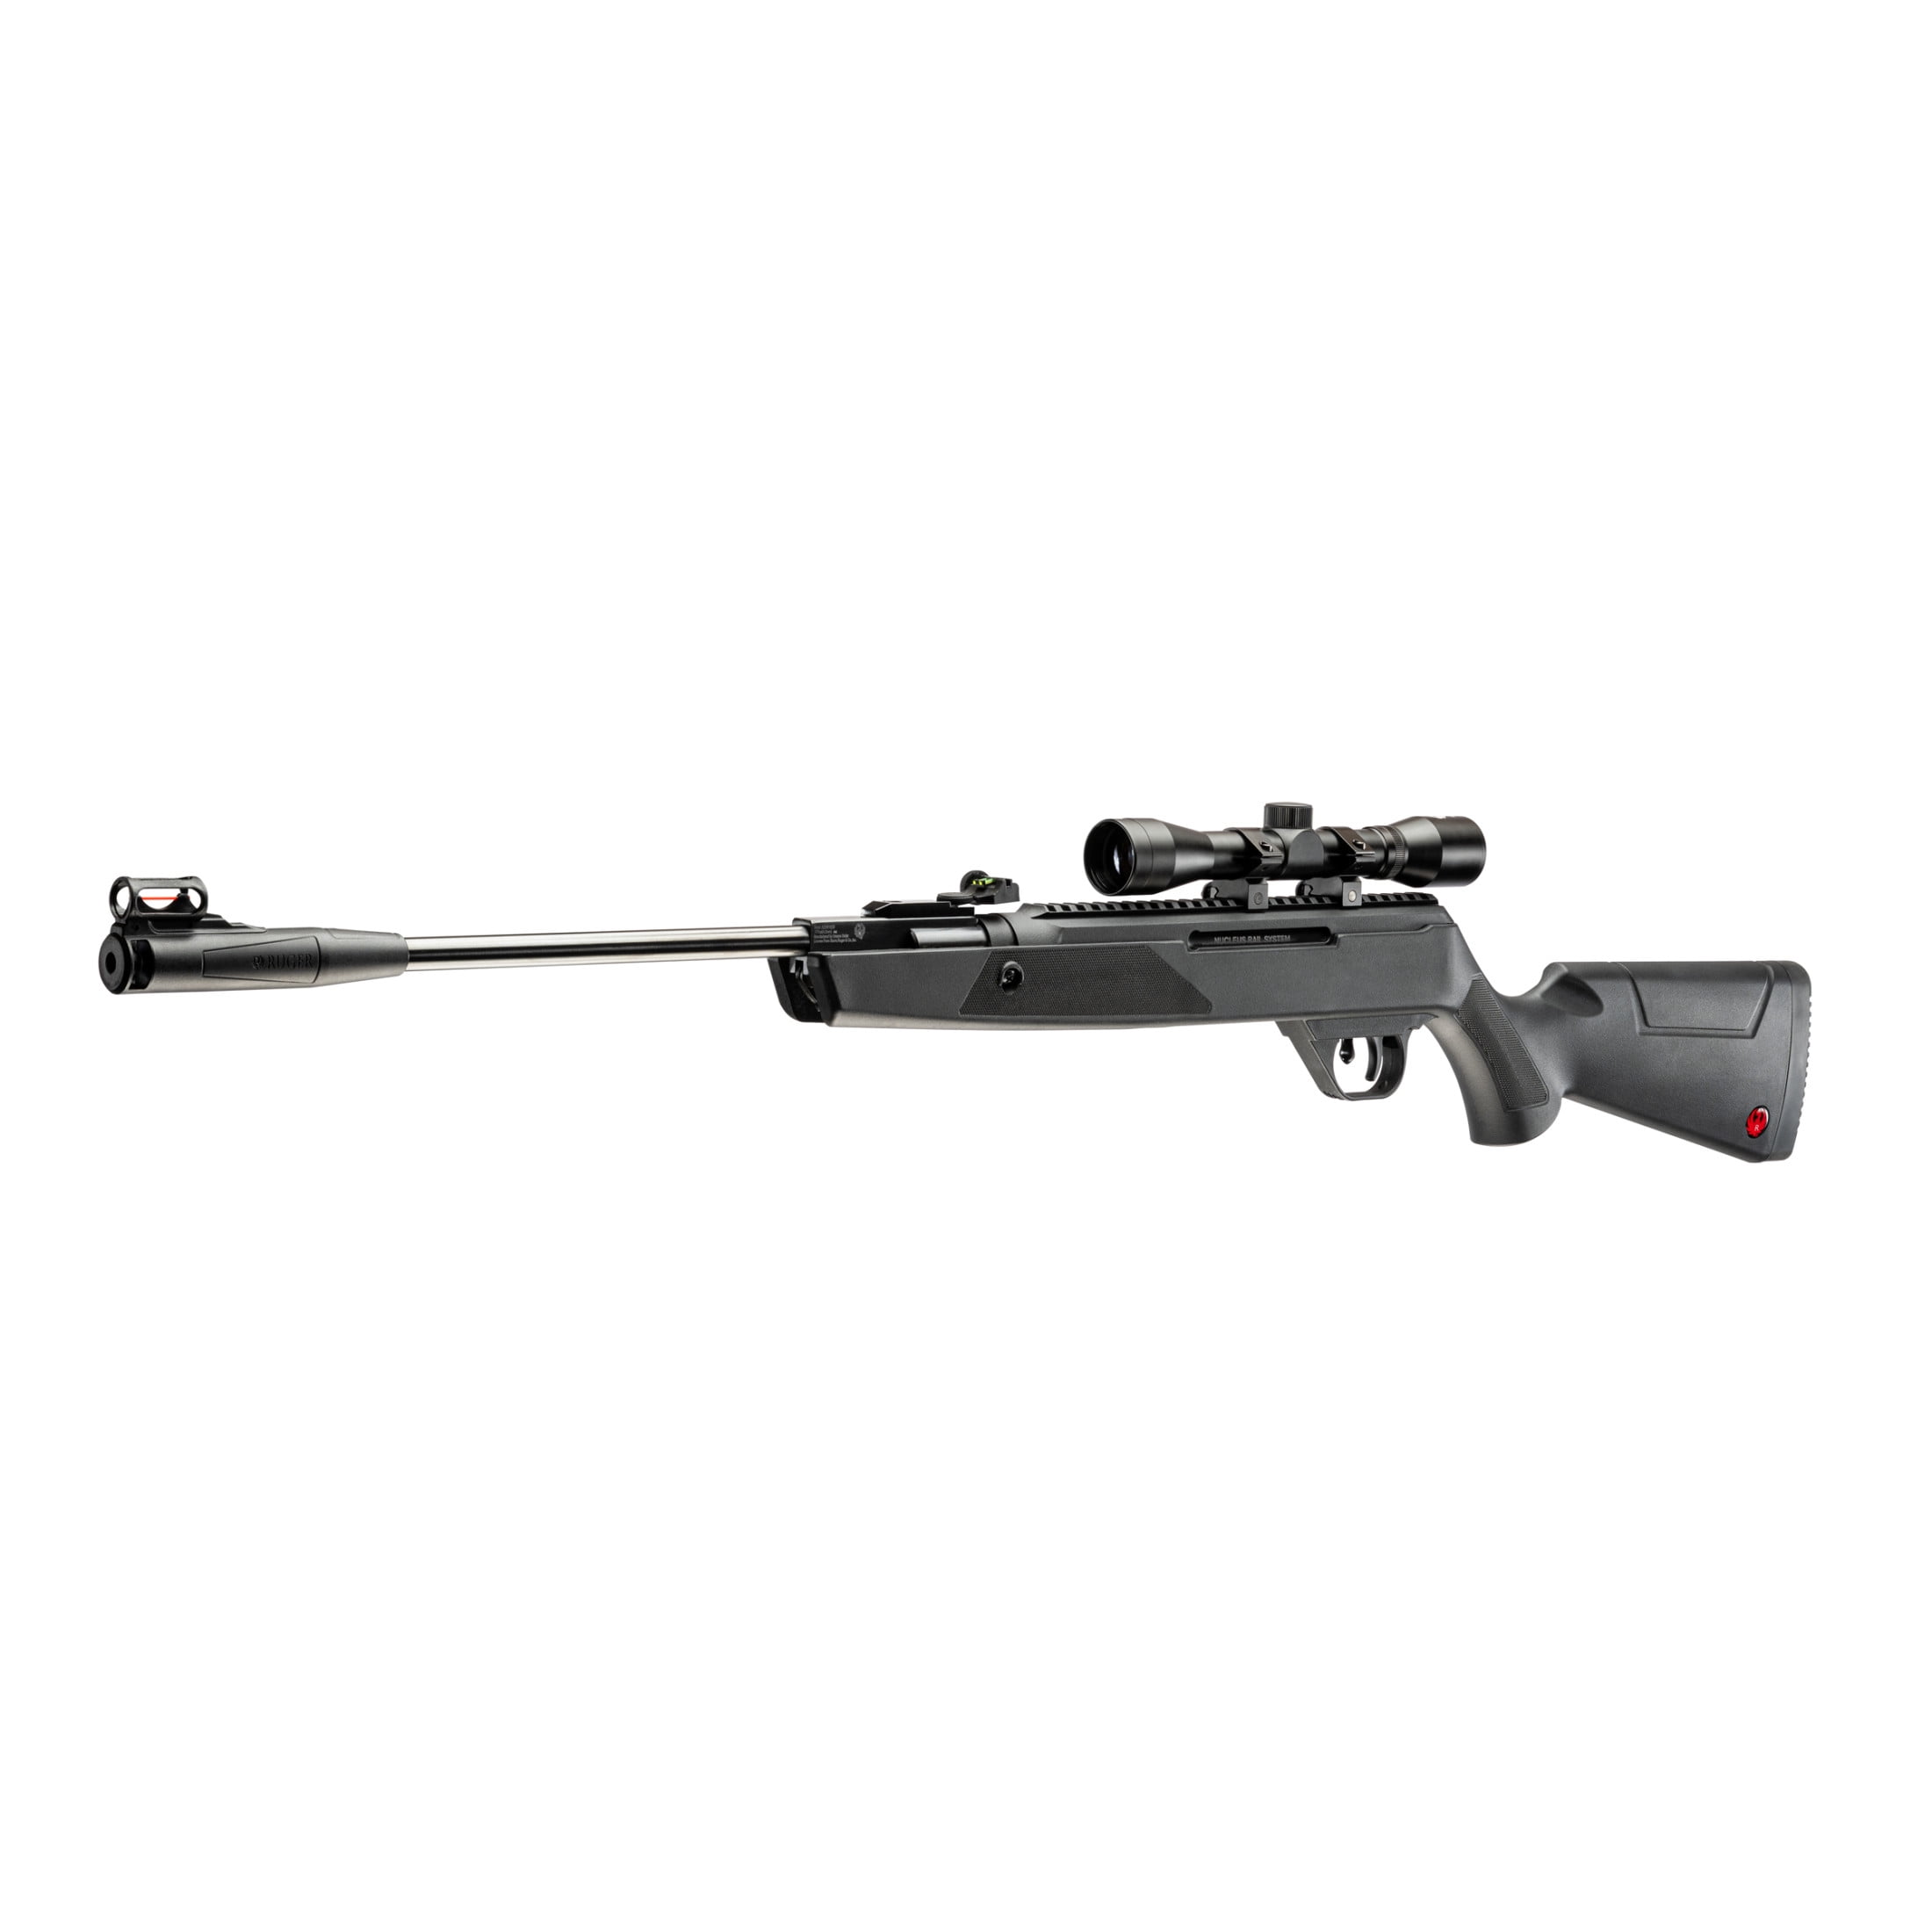 Ruger Airhawk Elite II Air Rifle  .177 Pellet with  Gas Piston